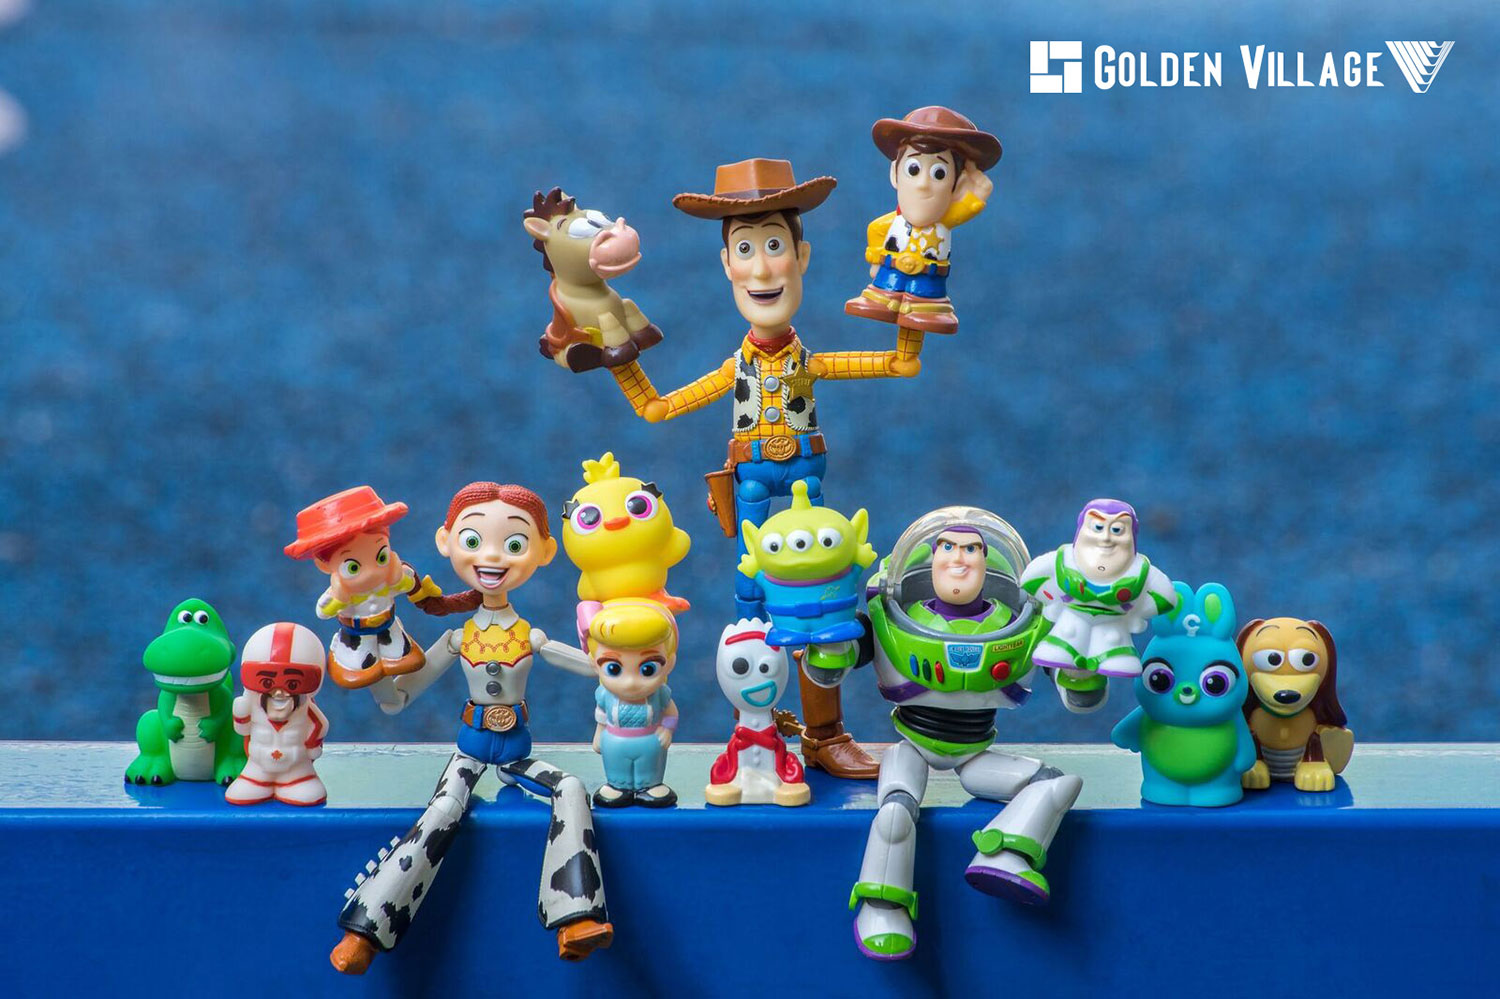 Collect these finger puppet collectibles with Golden Village’s Toy Story 4 Exclusive Combo!